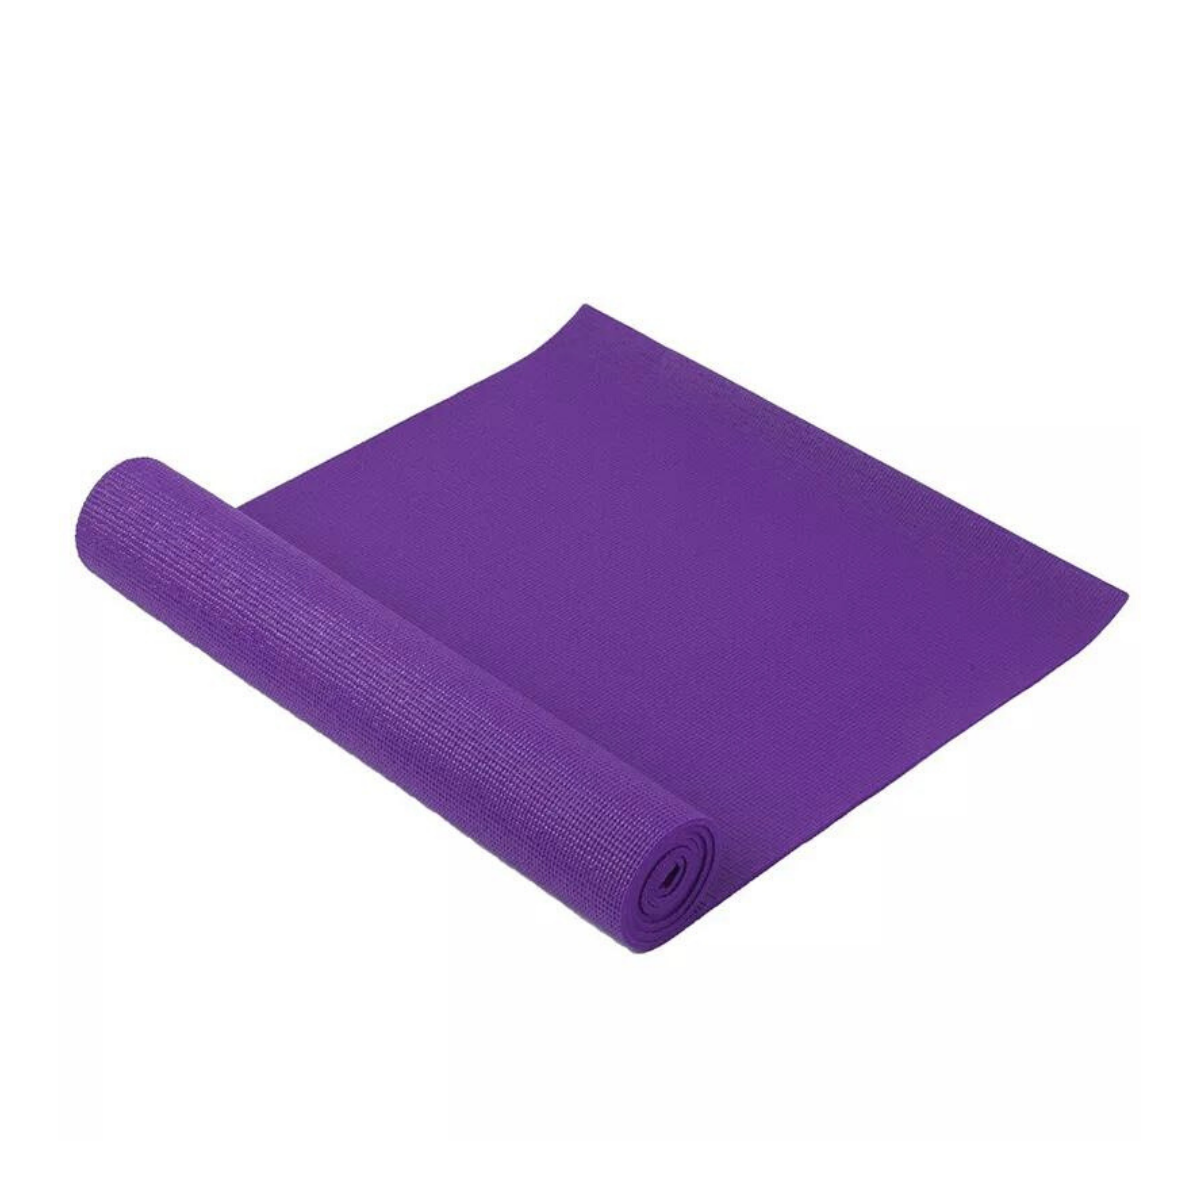 Performance Yoga Mat with Carrying Straps for Yoga and Pilates